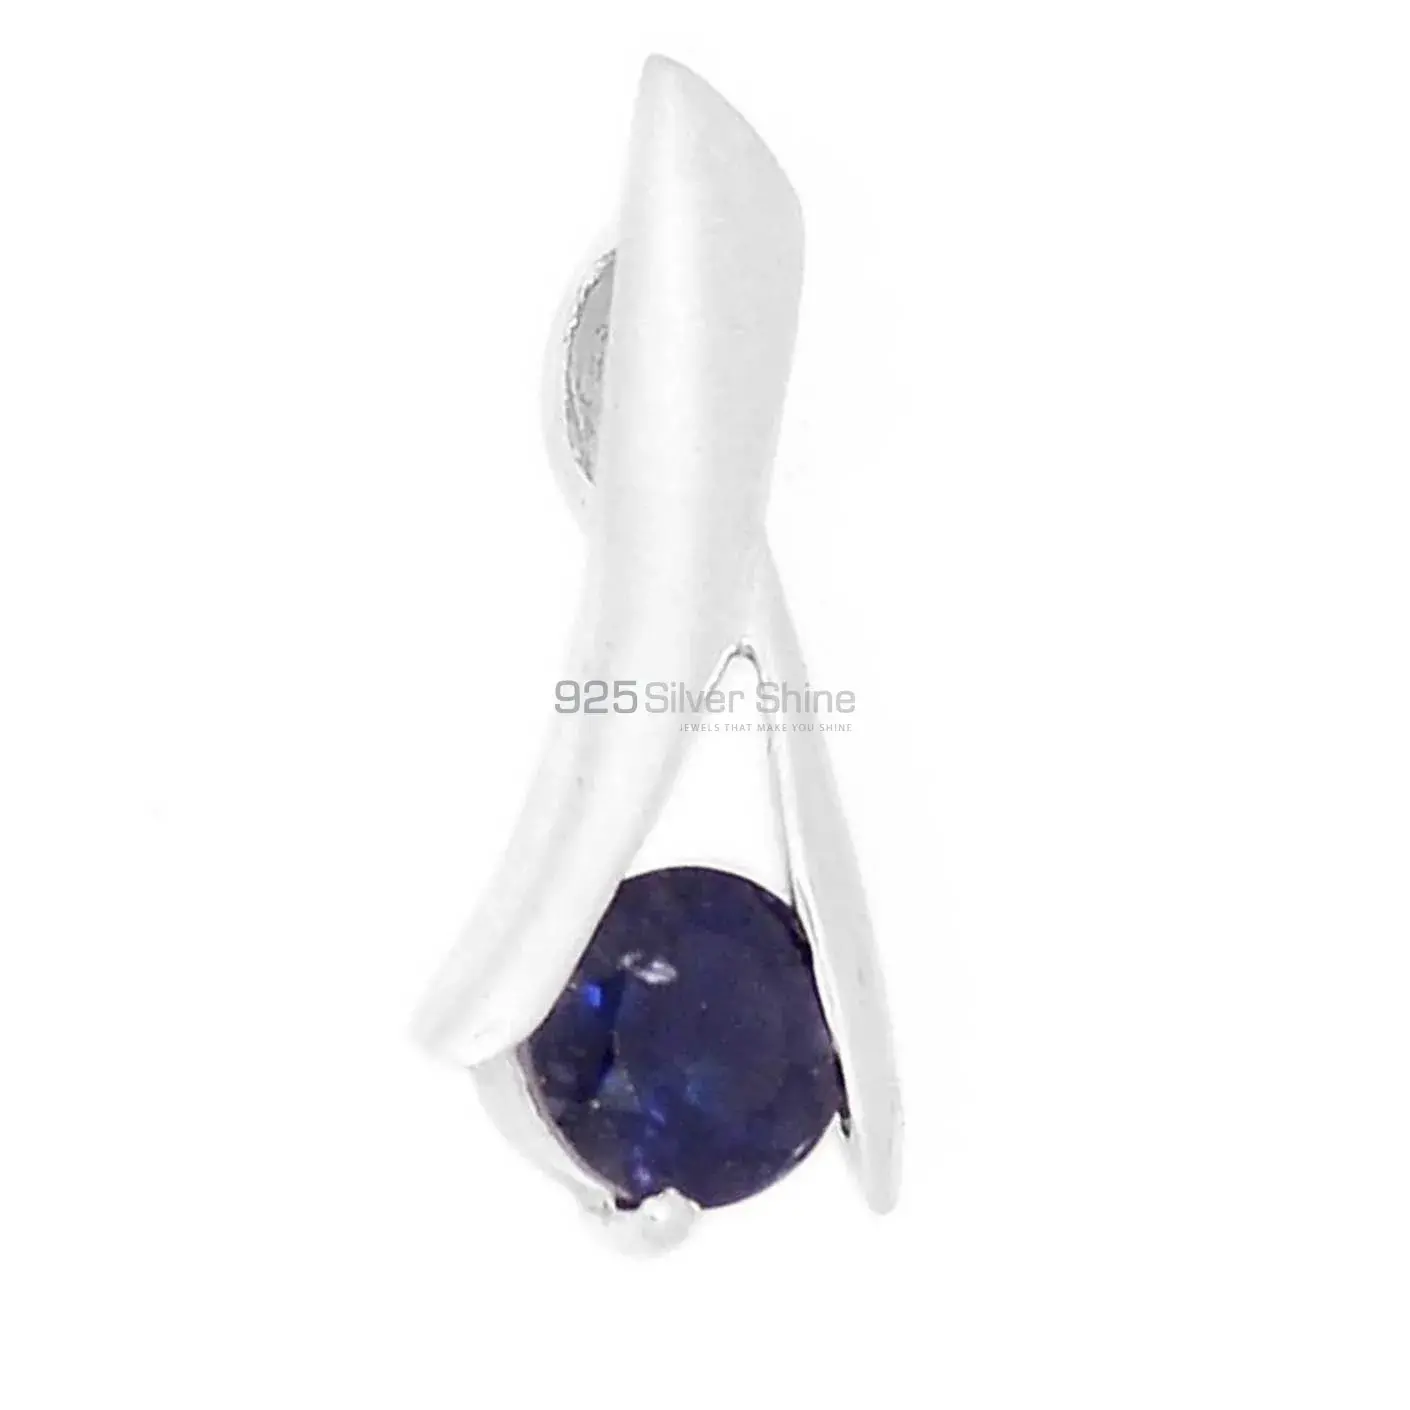 Top Quality Iolite Gemstone Pendants Exporters In 925 Solid Silver Jewelry 925SP284-2_1